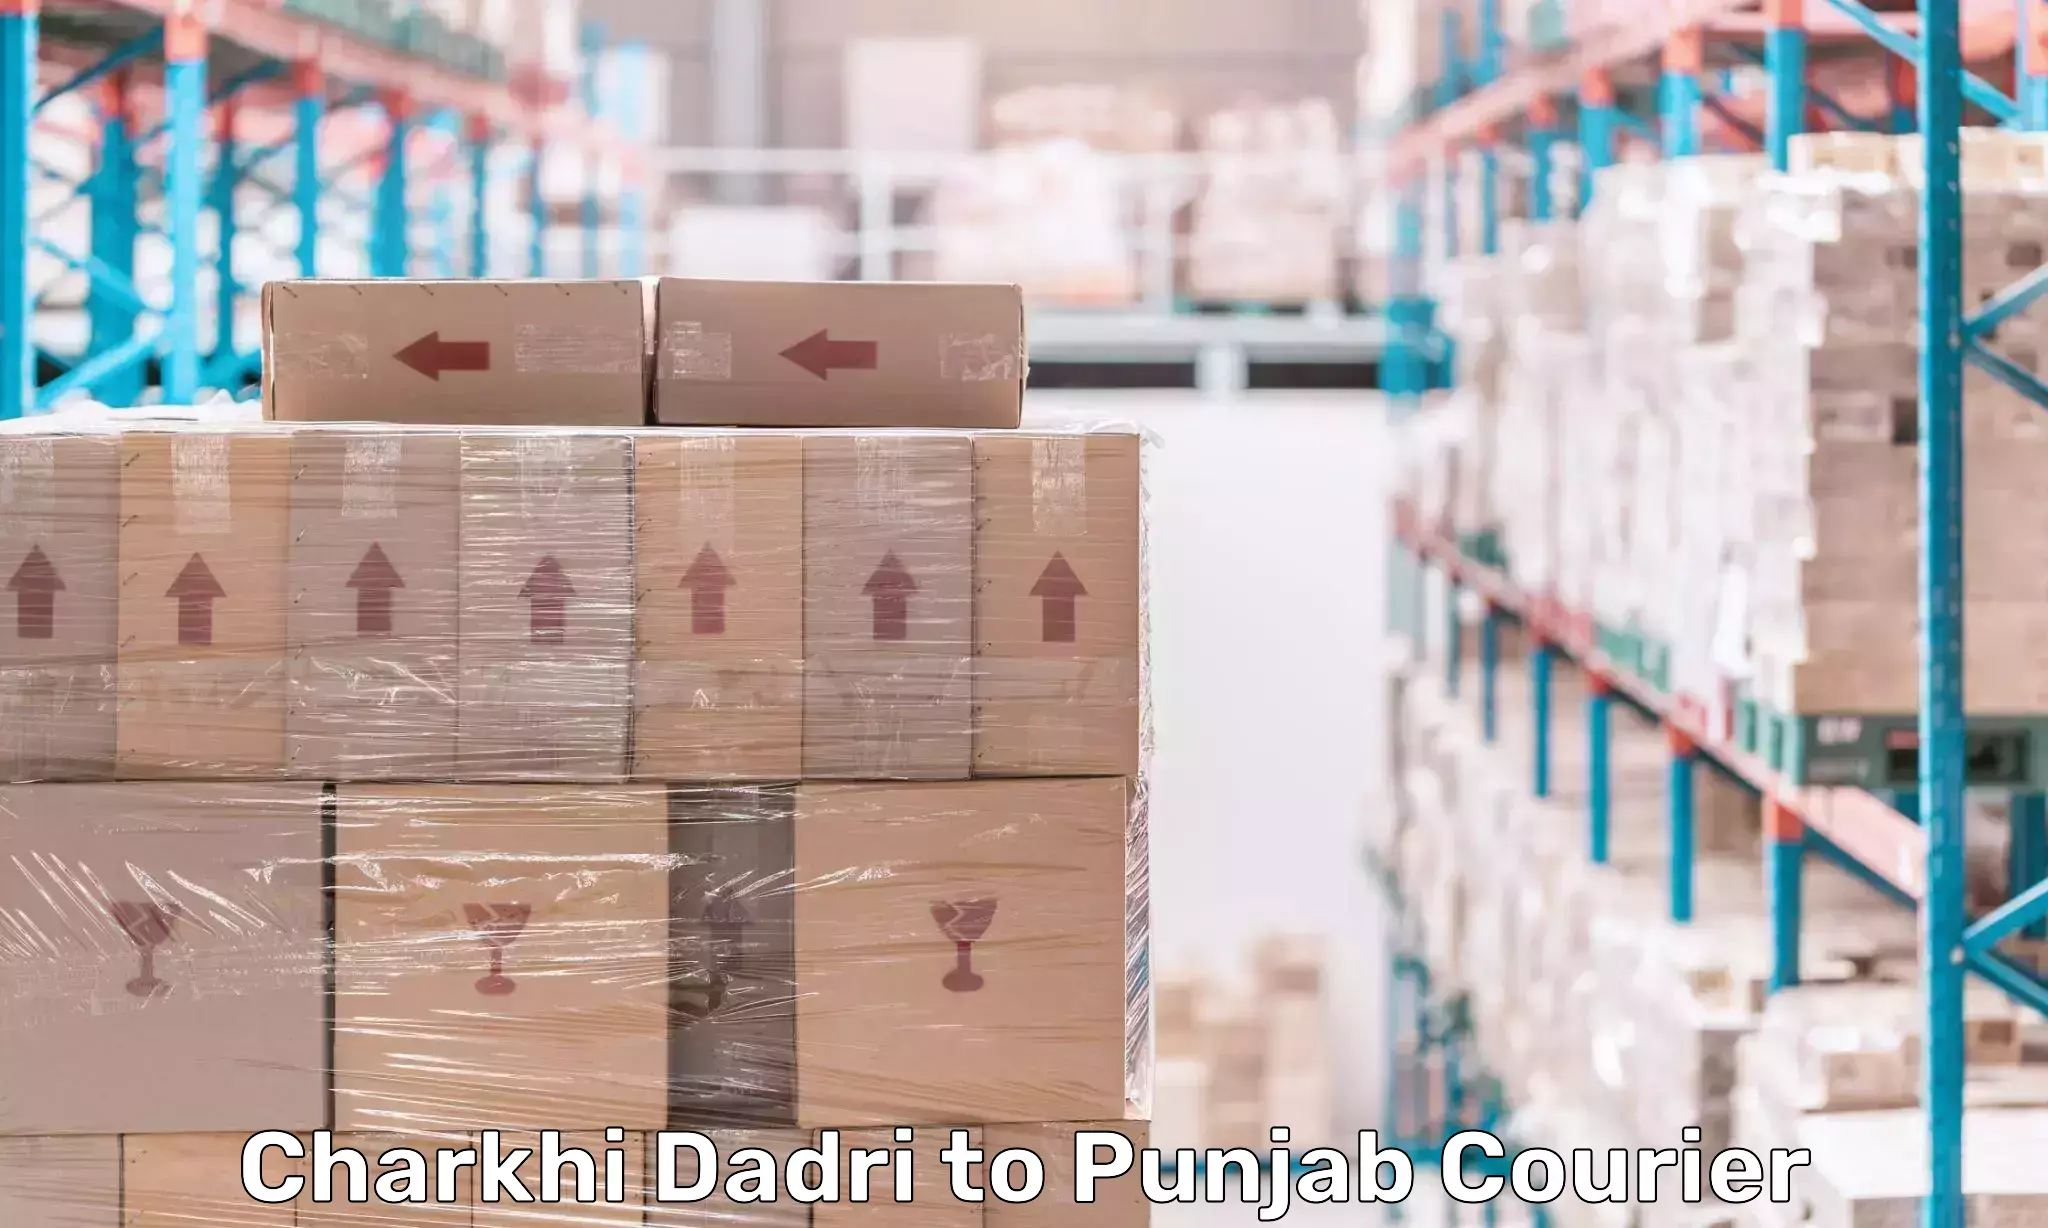 State-of-the-art courier technology Charkhi Dadri to Jalandhar